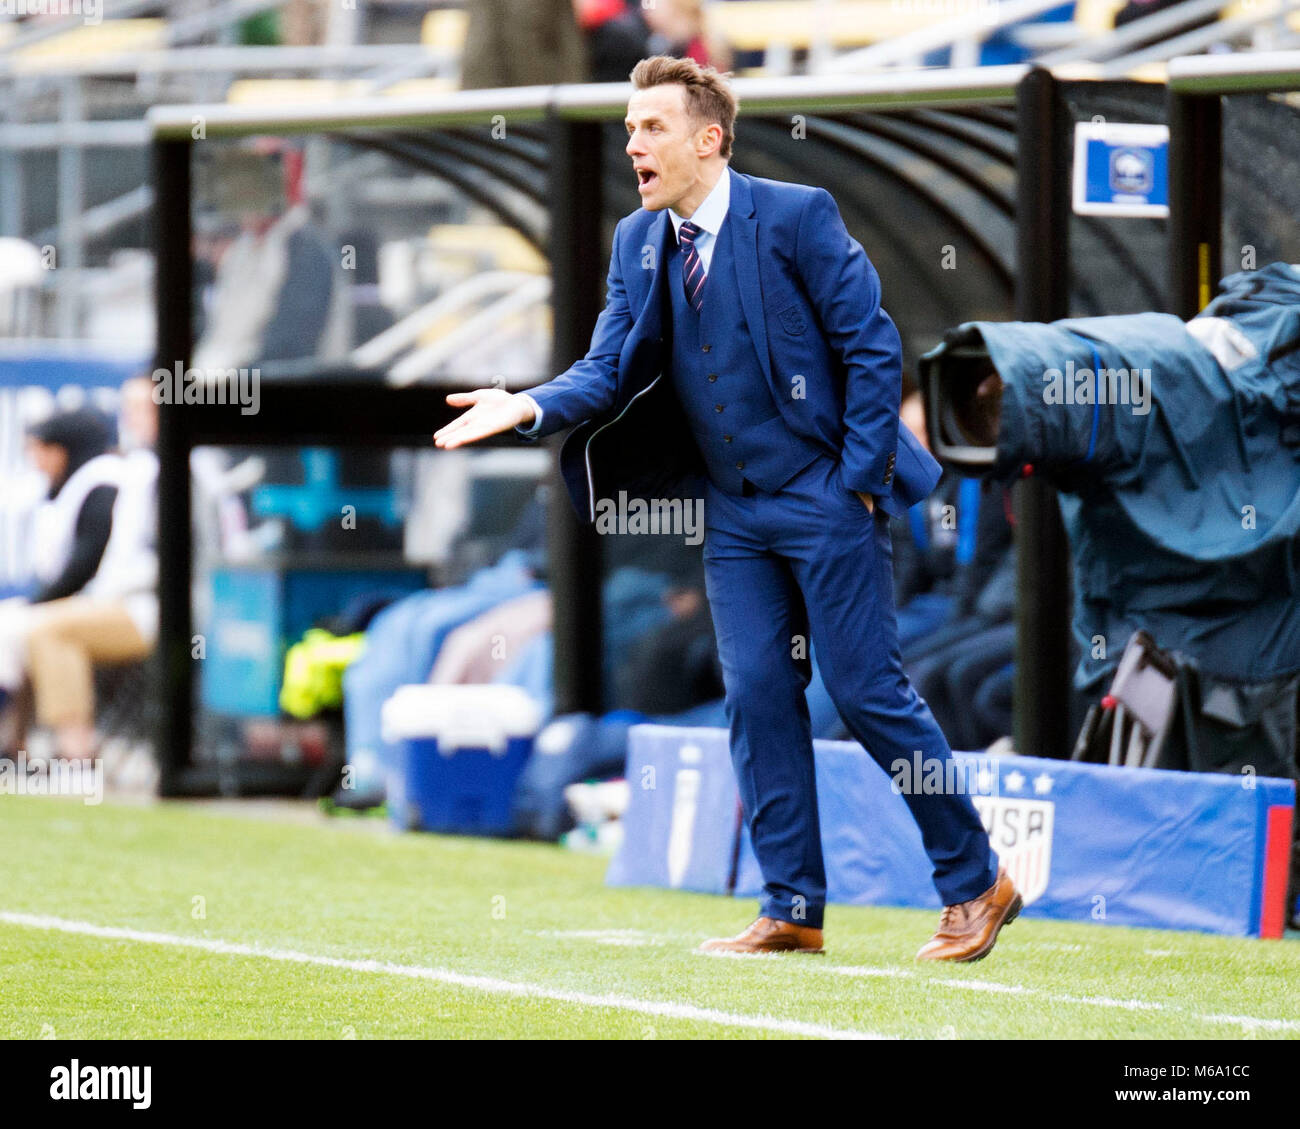 Columbus, Ohio, USA. March 1, 2018: England head coach Phil Neville coaches his tem from the sideline against France during their match at the SheBelieves Cup in Columbus, Ohio, USA. Brent Clark/Alamy Live  News Stock Photo